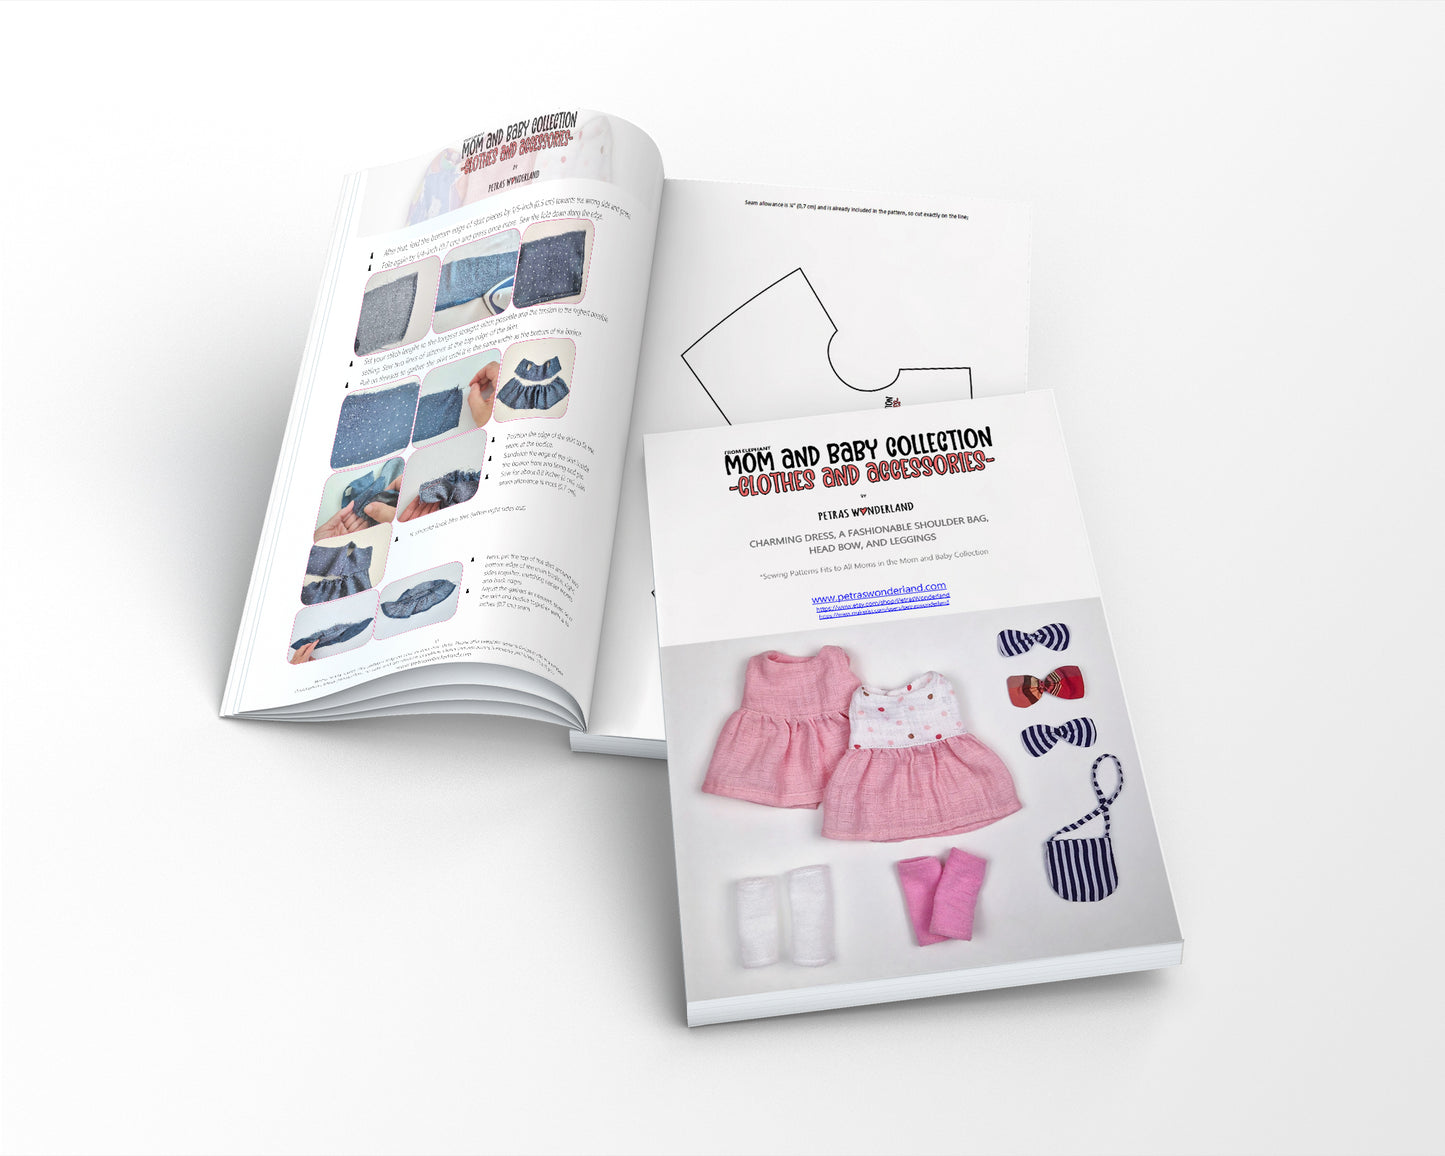 Clothes and accessories from Elephant, Mom and Baby collections - sewing pattern and tutorial